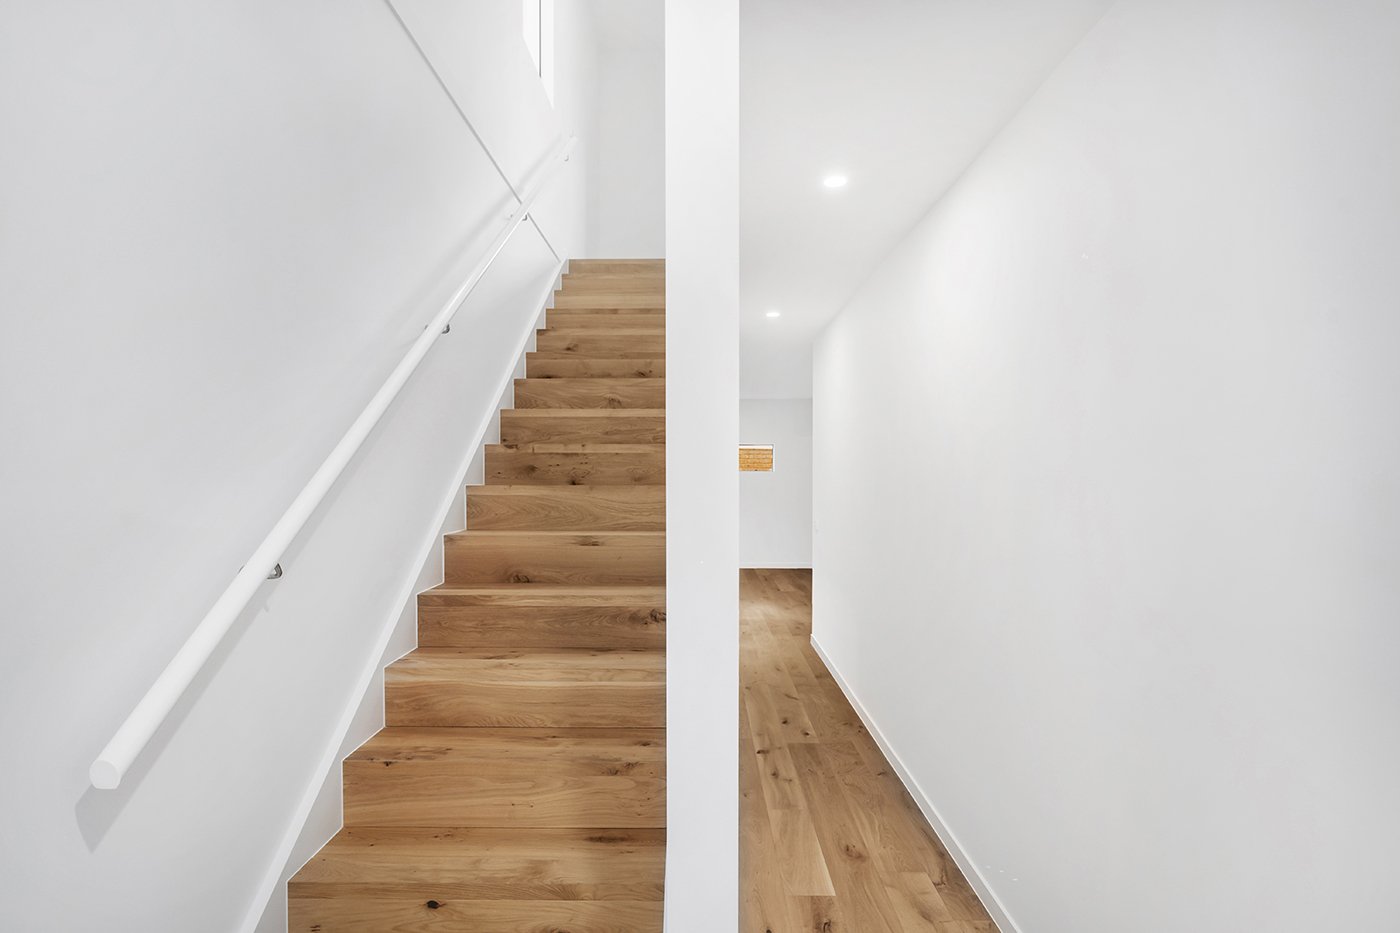 014 - 21 McComb Street Lilydale VIC - Stairs and Hallway.jpg